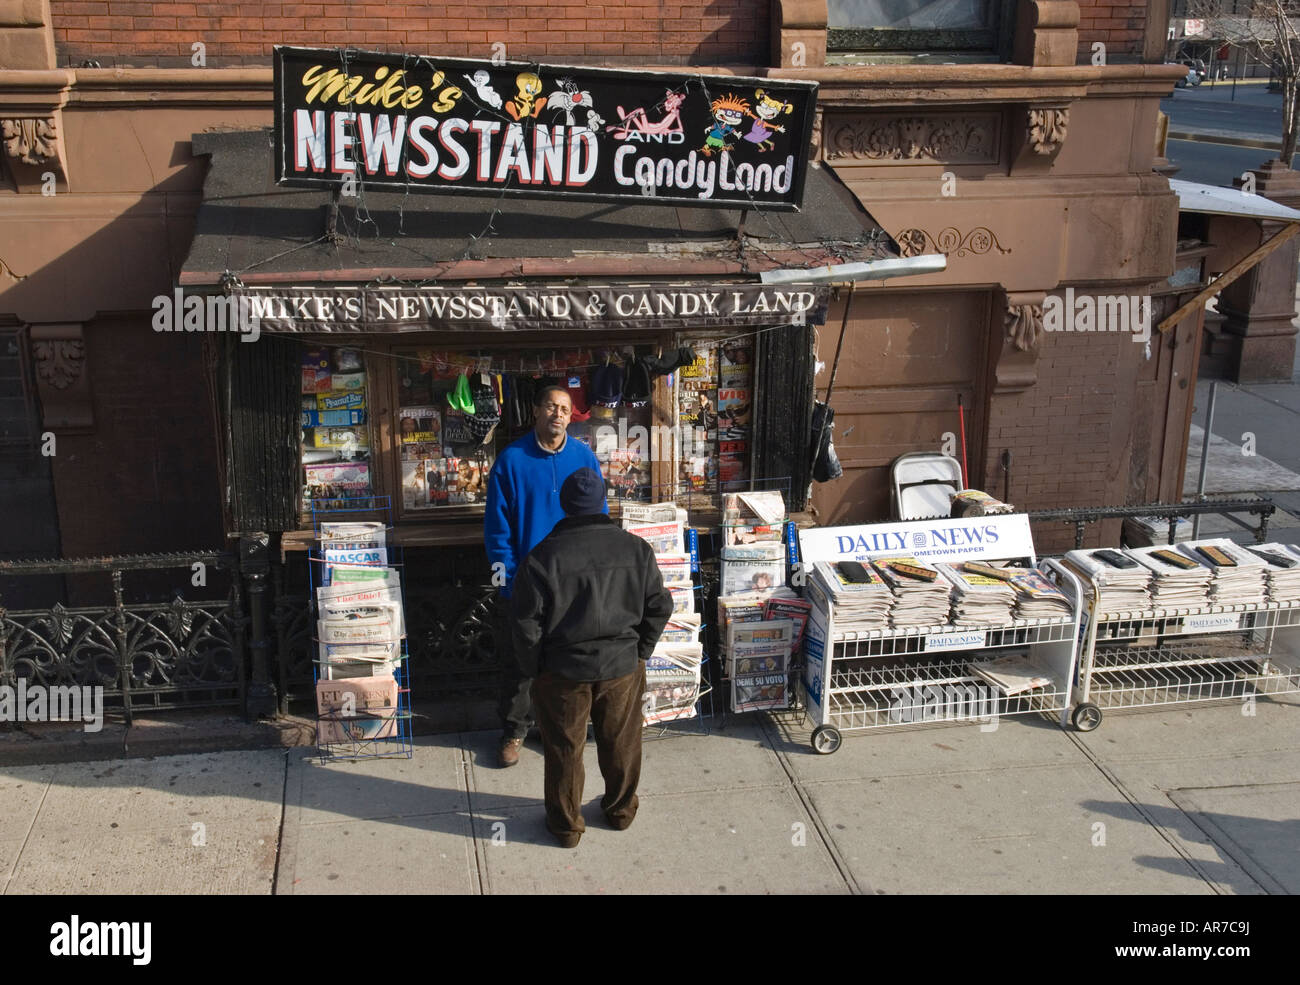 Two men talking at a newsstand in Harlem, New York CIty Stock Photo